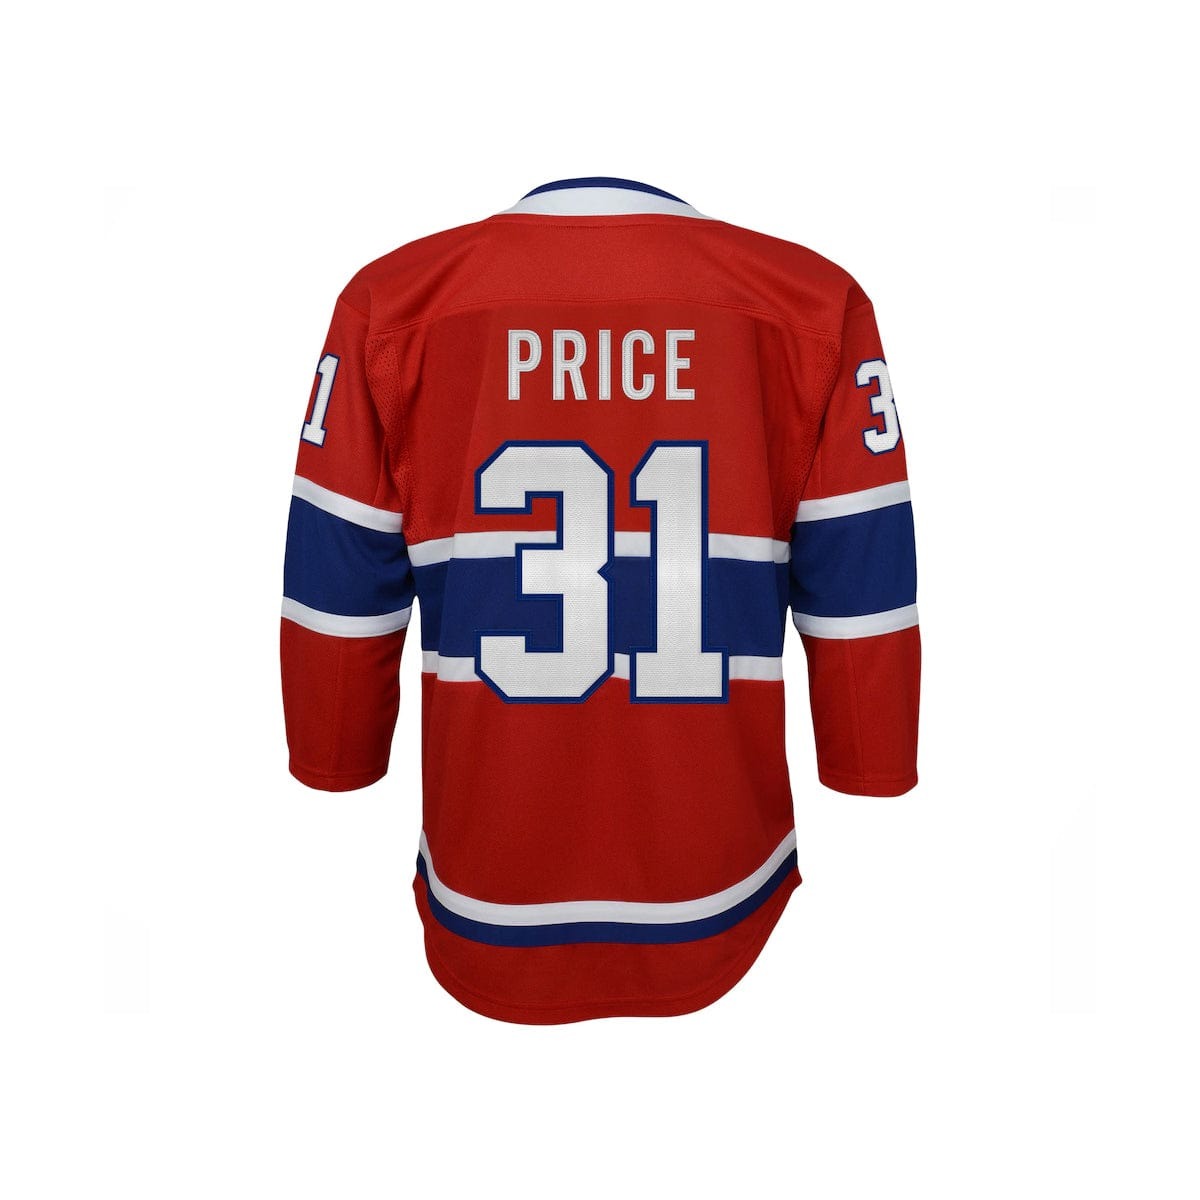 Montreal Canadiens Home Outer Stuff Premier Toddler Jersey - Carey Price